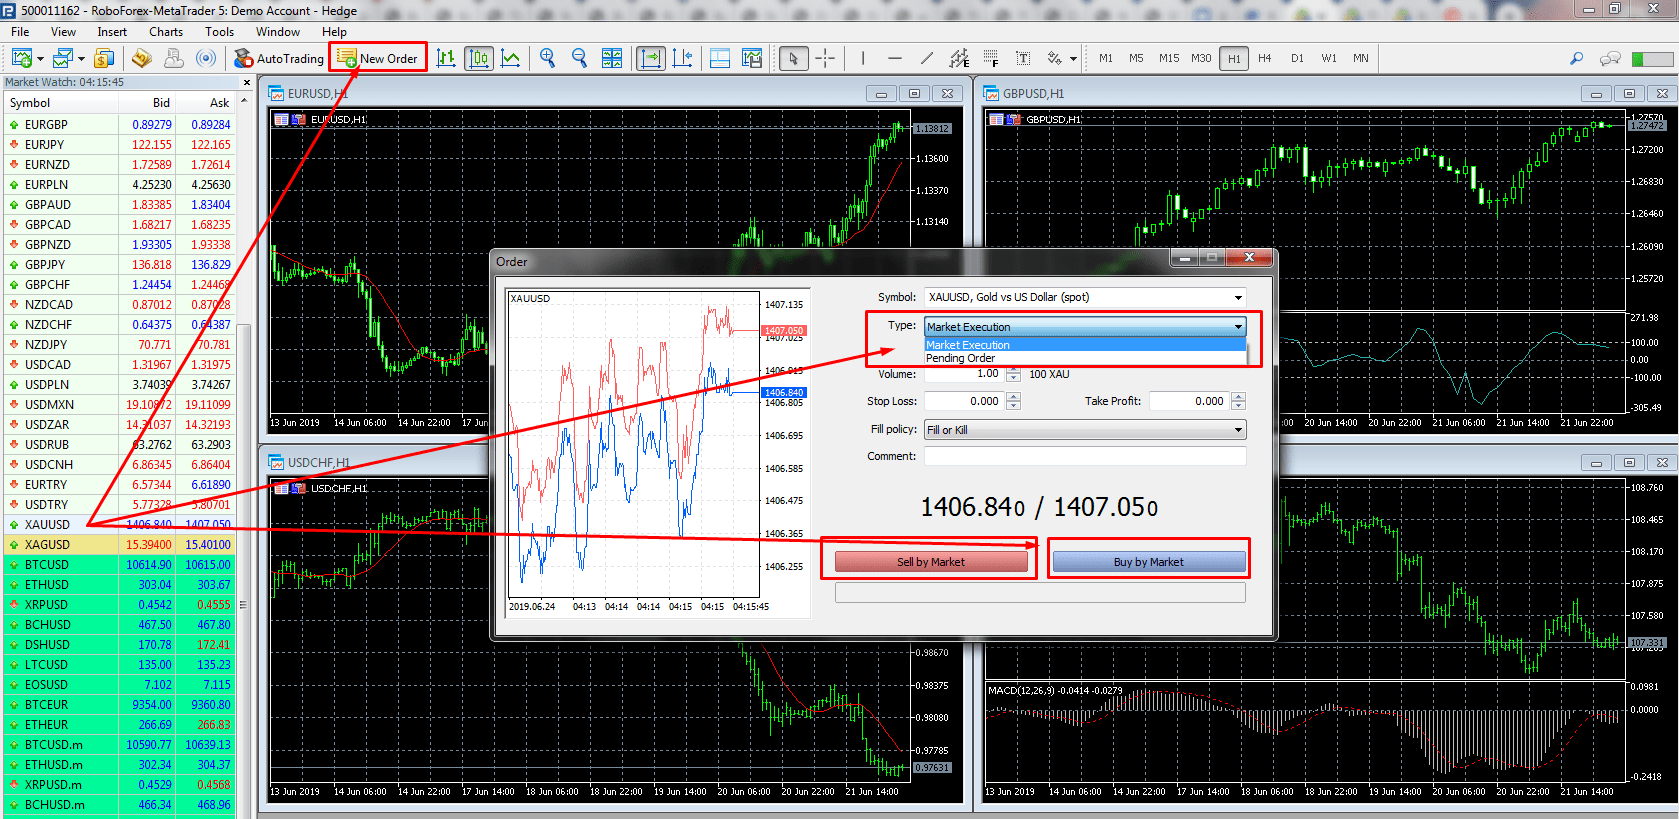 How to Use MetaTrader 5 (MT5)? A Trader's Guide - R Blog - RoboForex